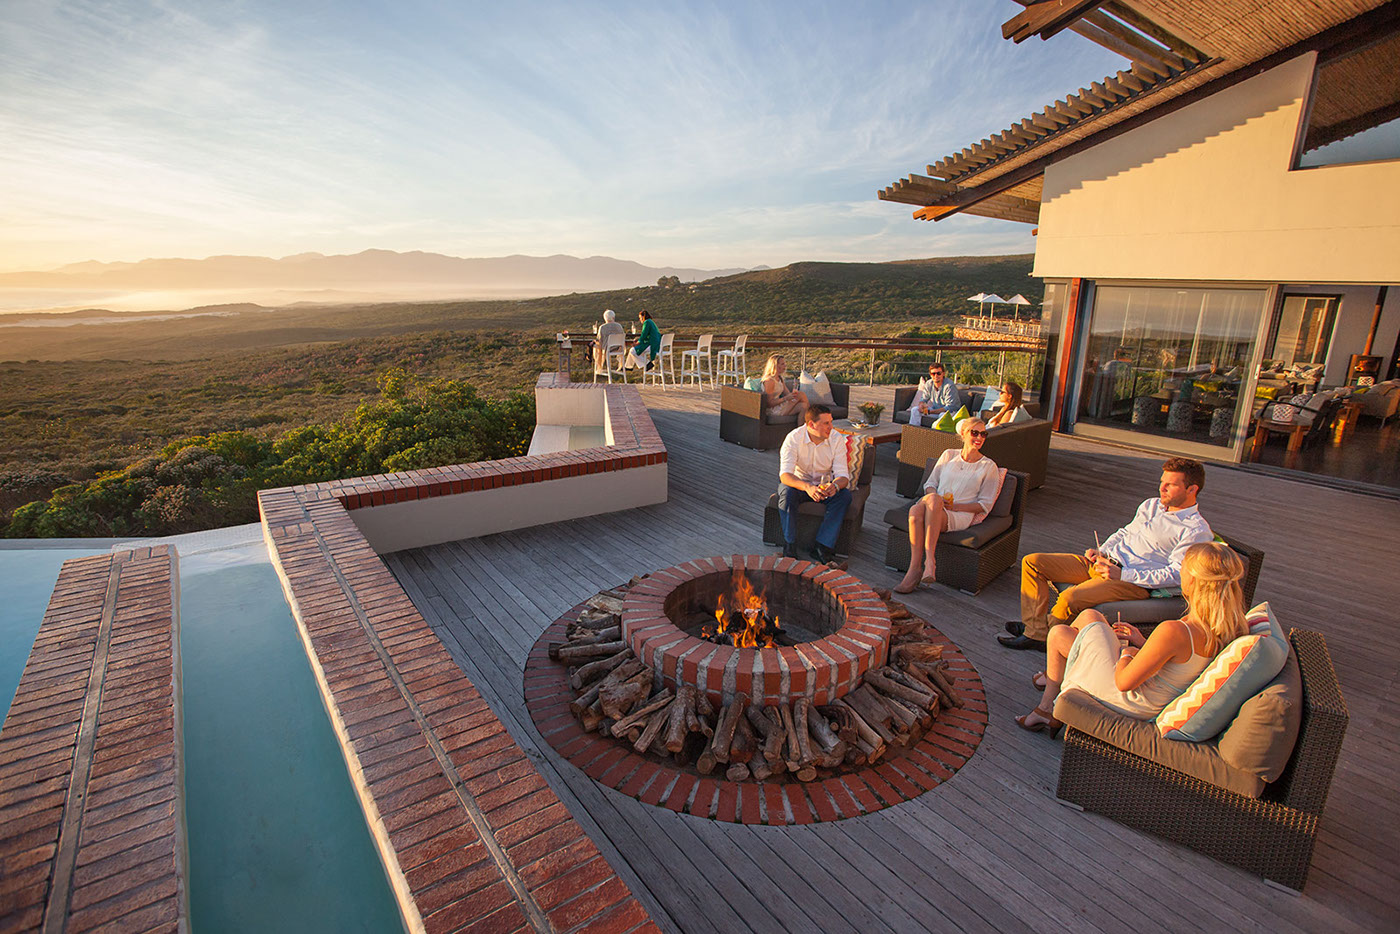 destination Travel south africa conservation sustainable tourism hotel Hospitality luxury resort